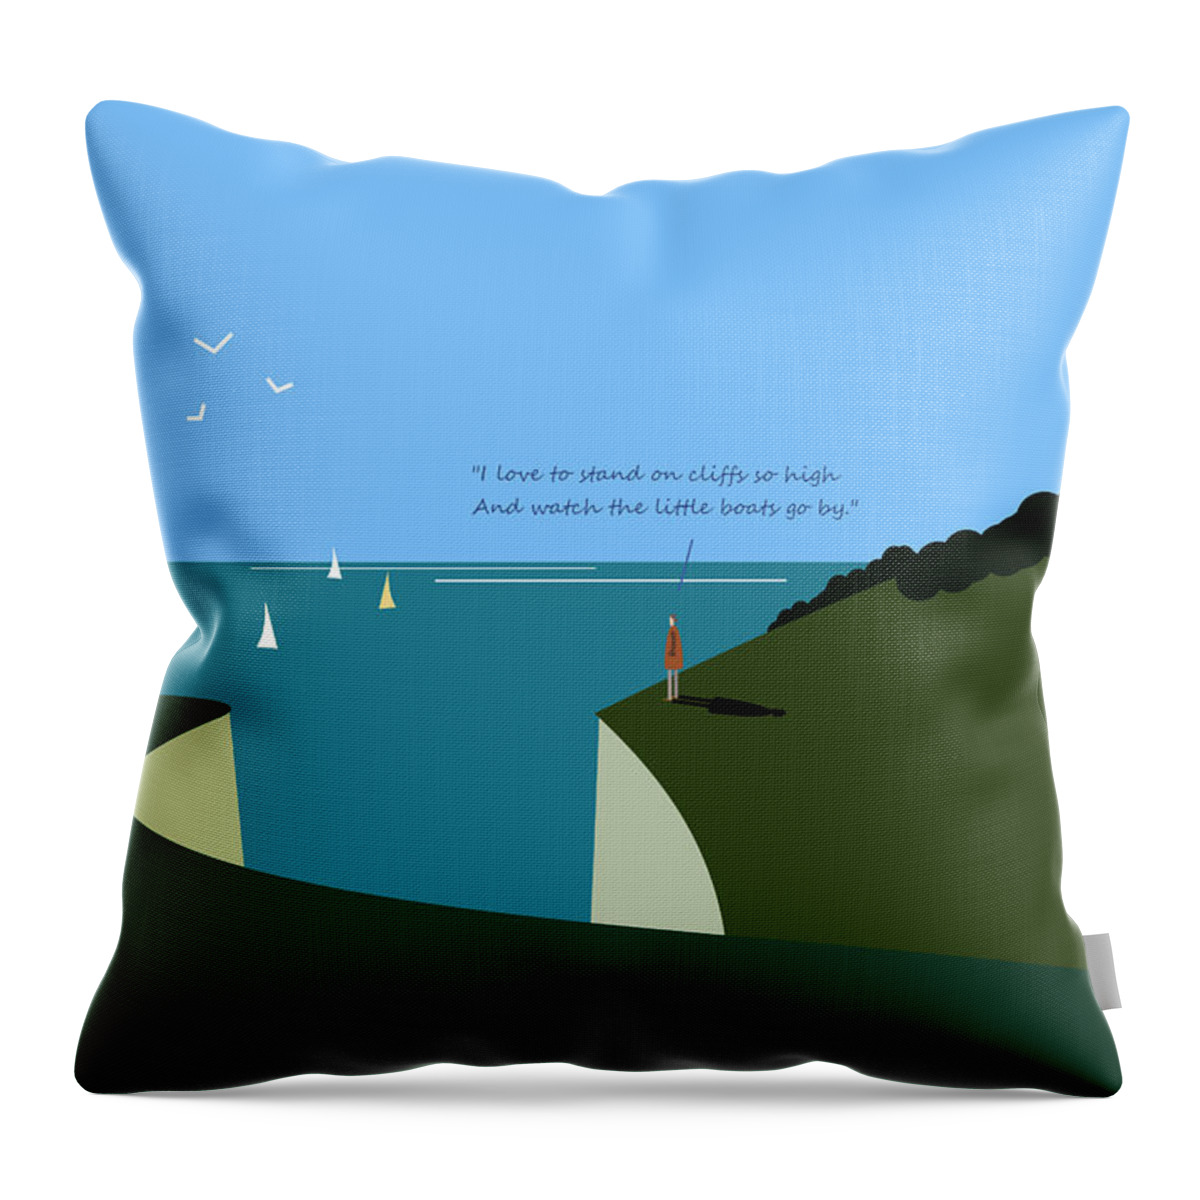 Boats Throw Pillow featuring the digital art As boats go by. by Fatline Graphic Art